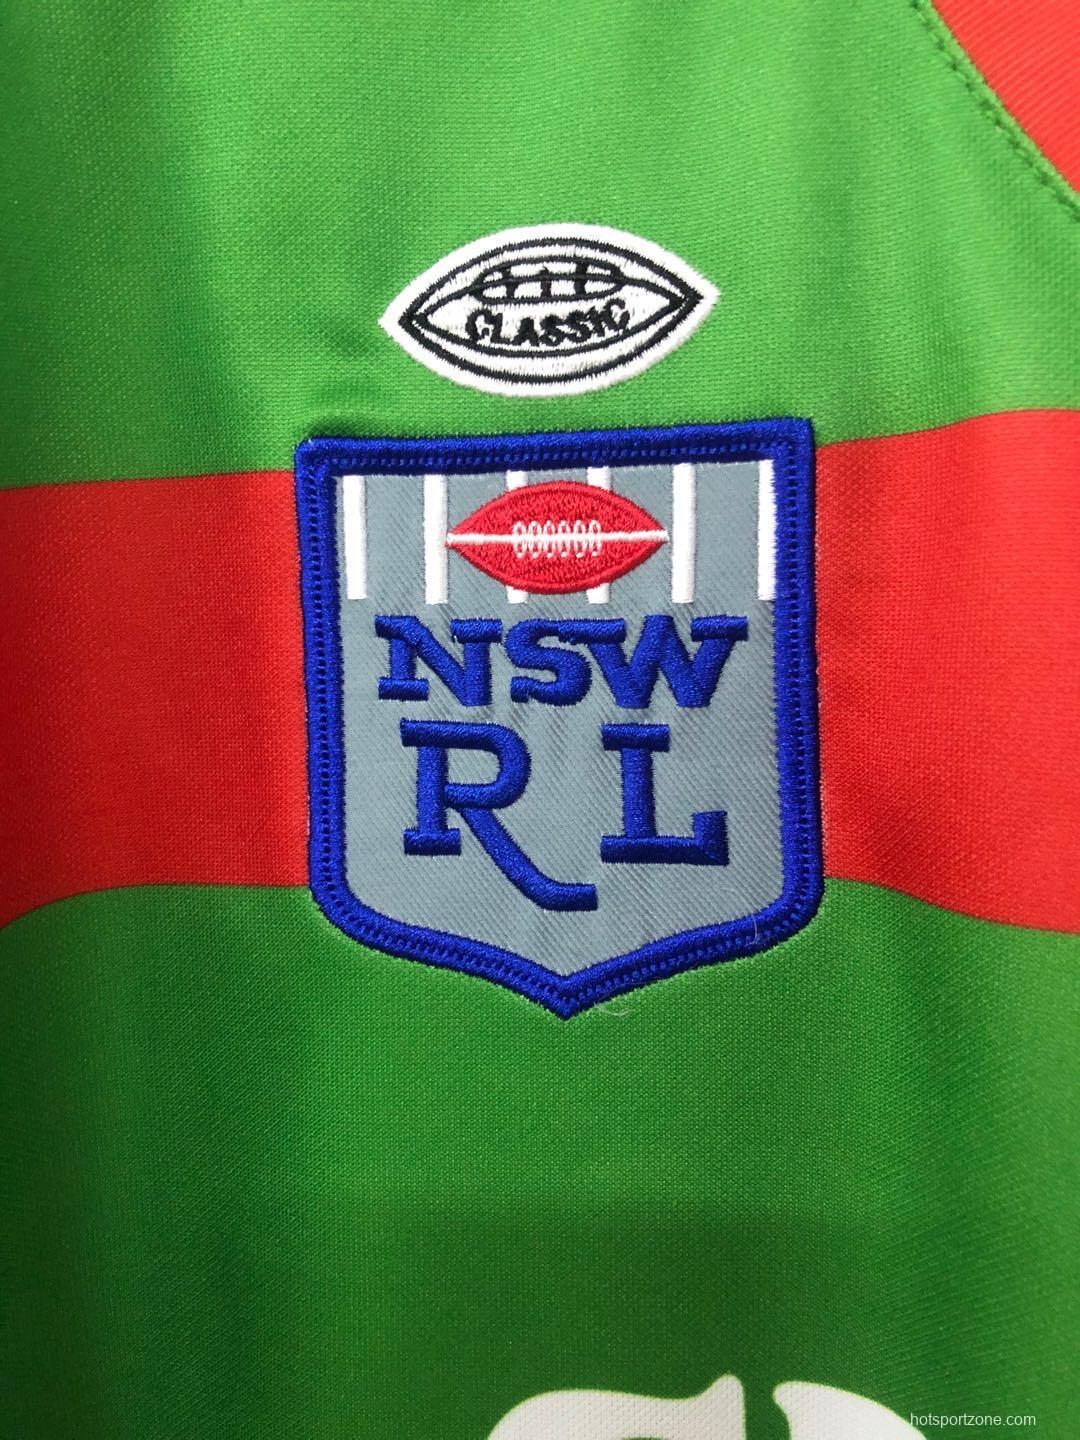 South Sydney Rabbitohs 1989 Retro Rugby Jersey